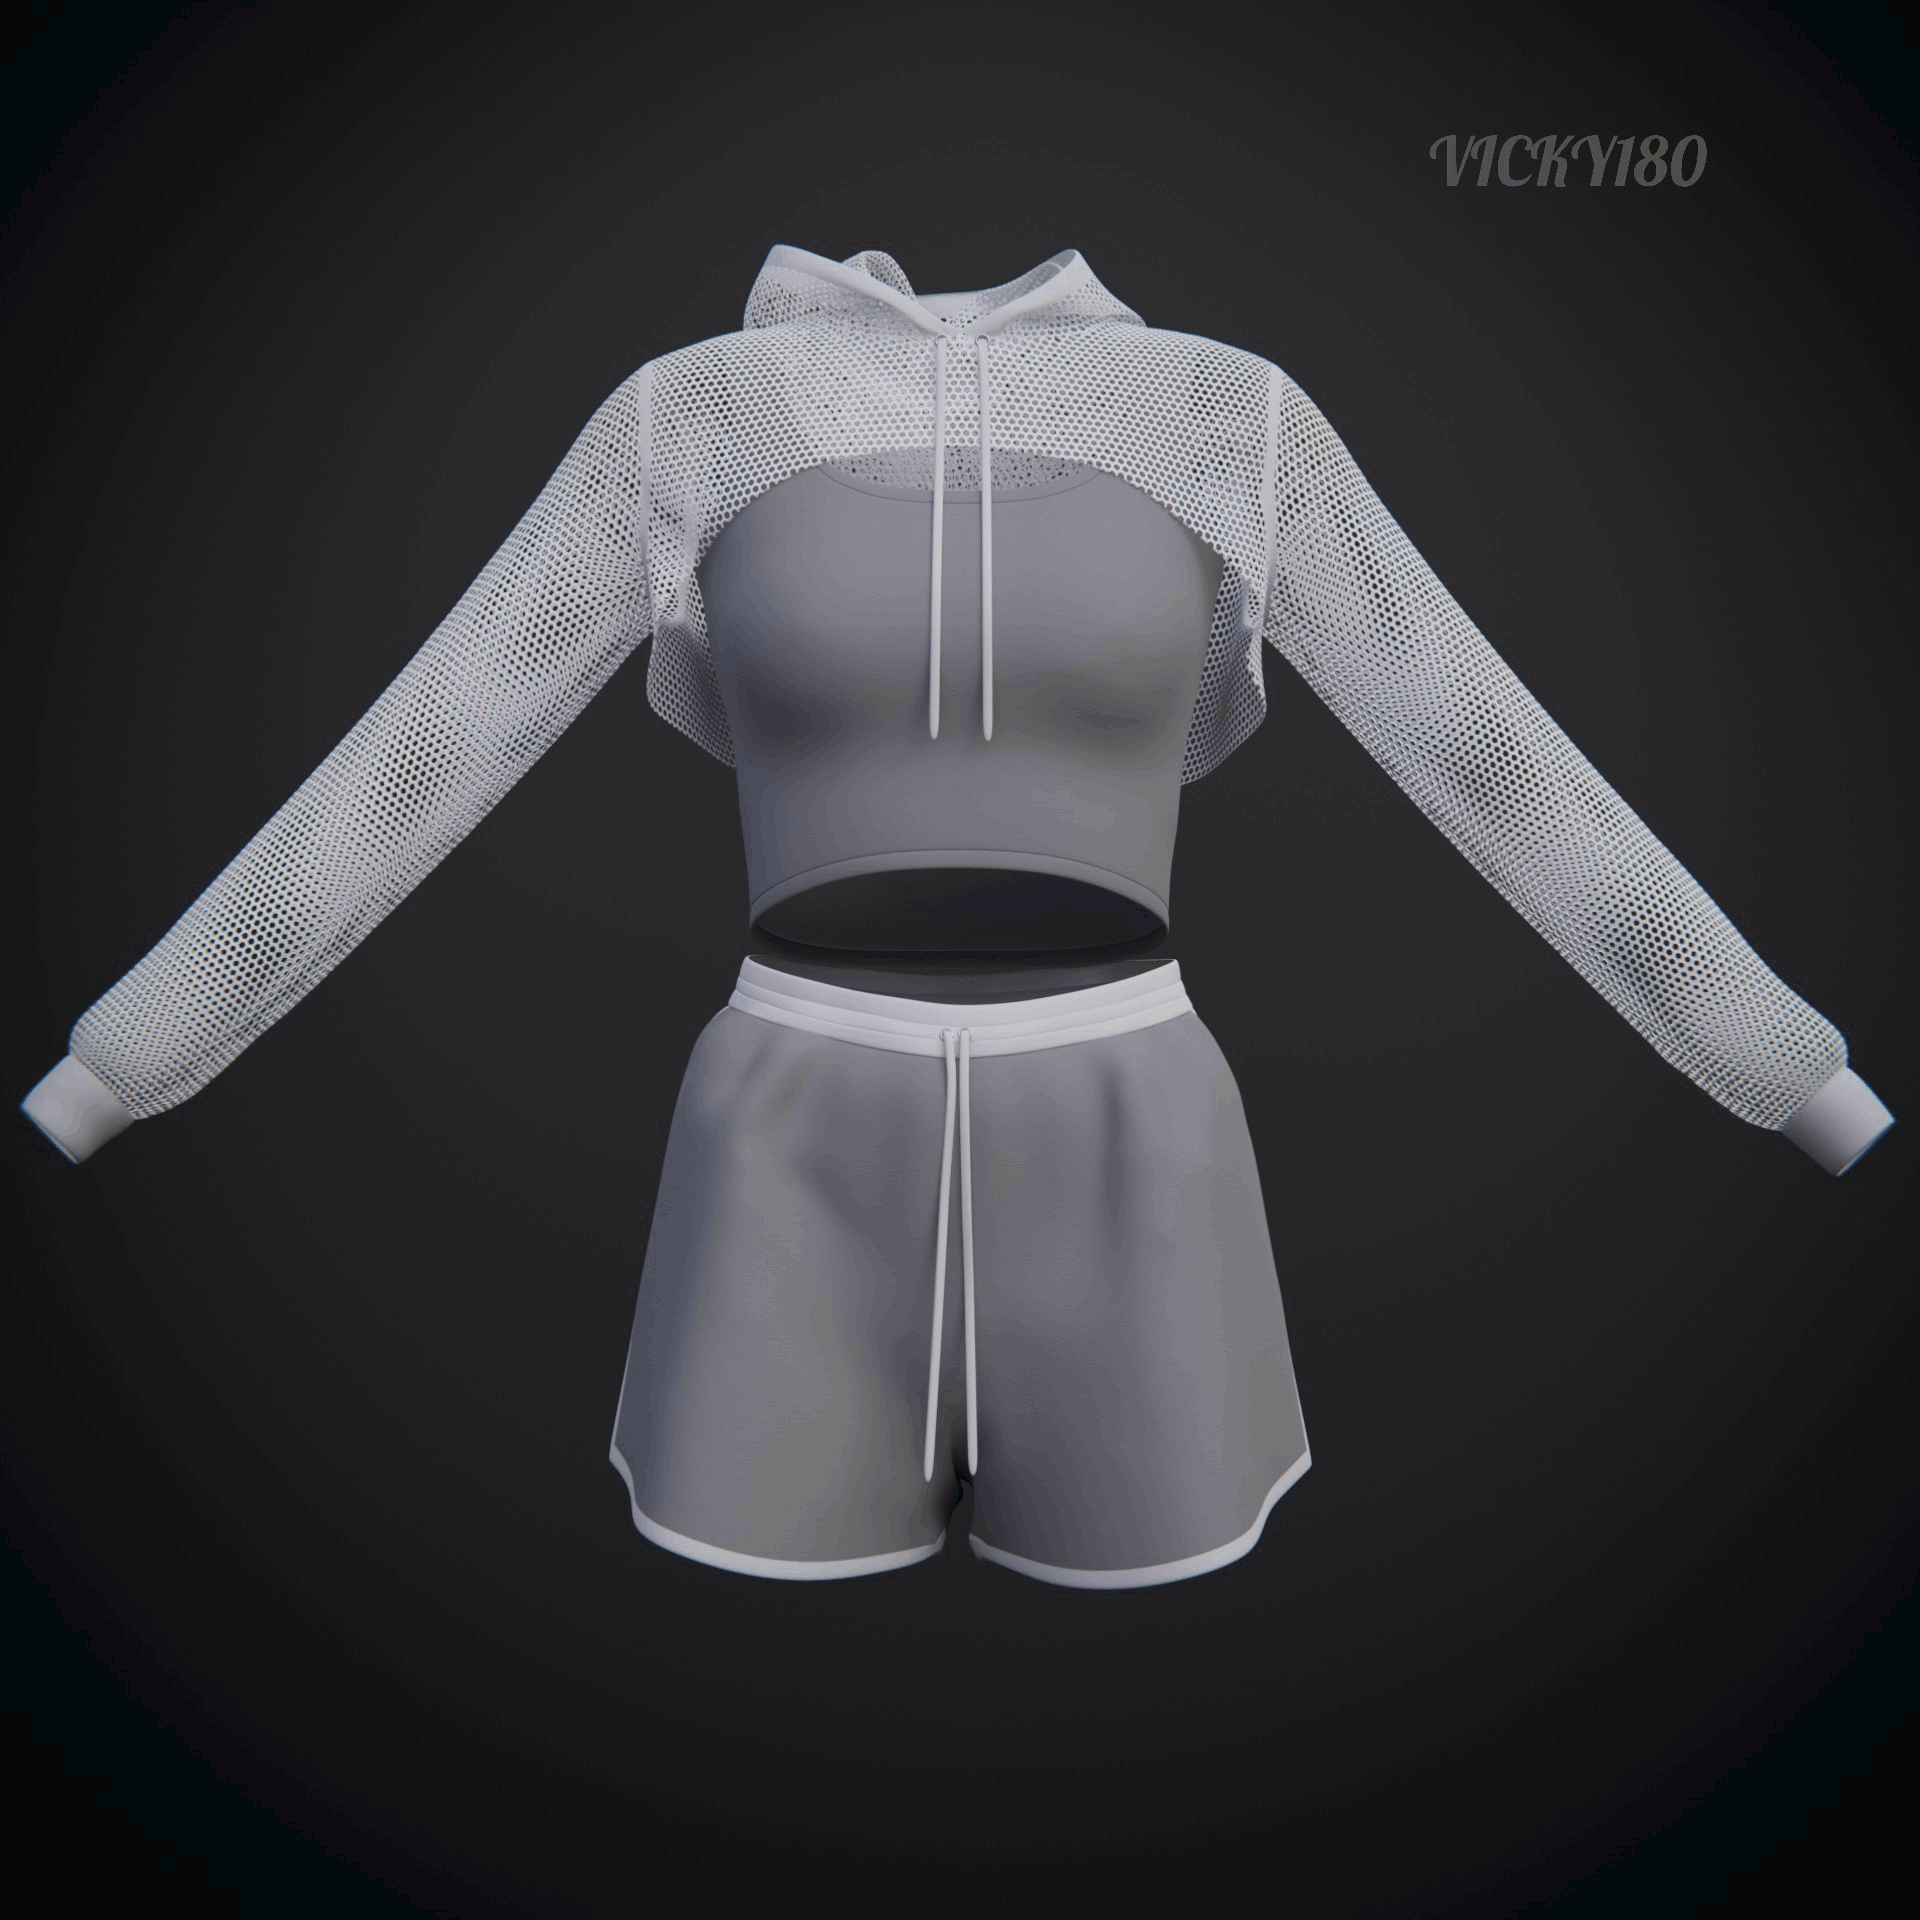 Shorts and Sports Bra Two Piece Workout Outfit With Net Top - 3D Model by  vicky180